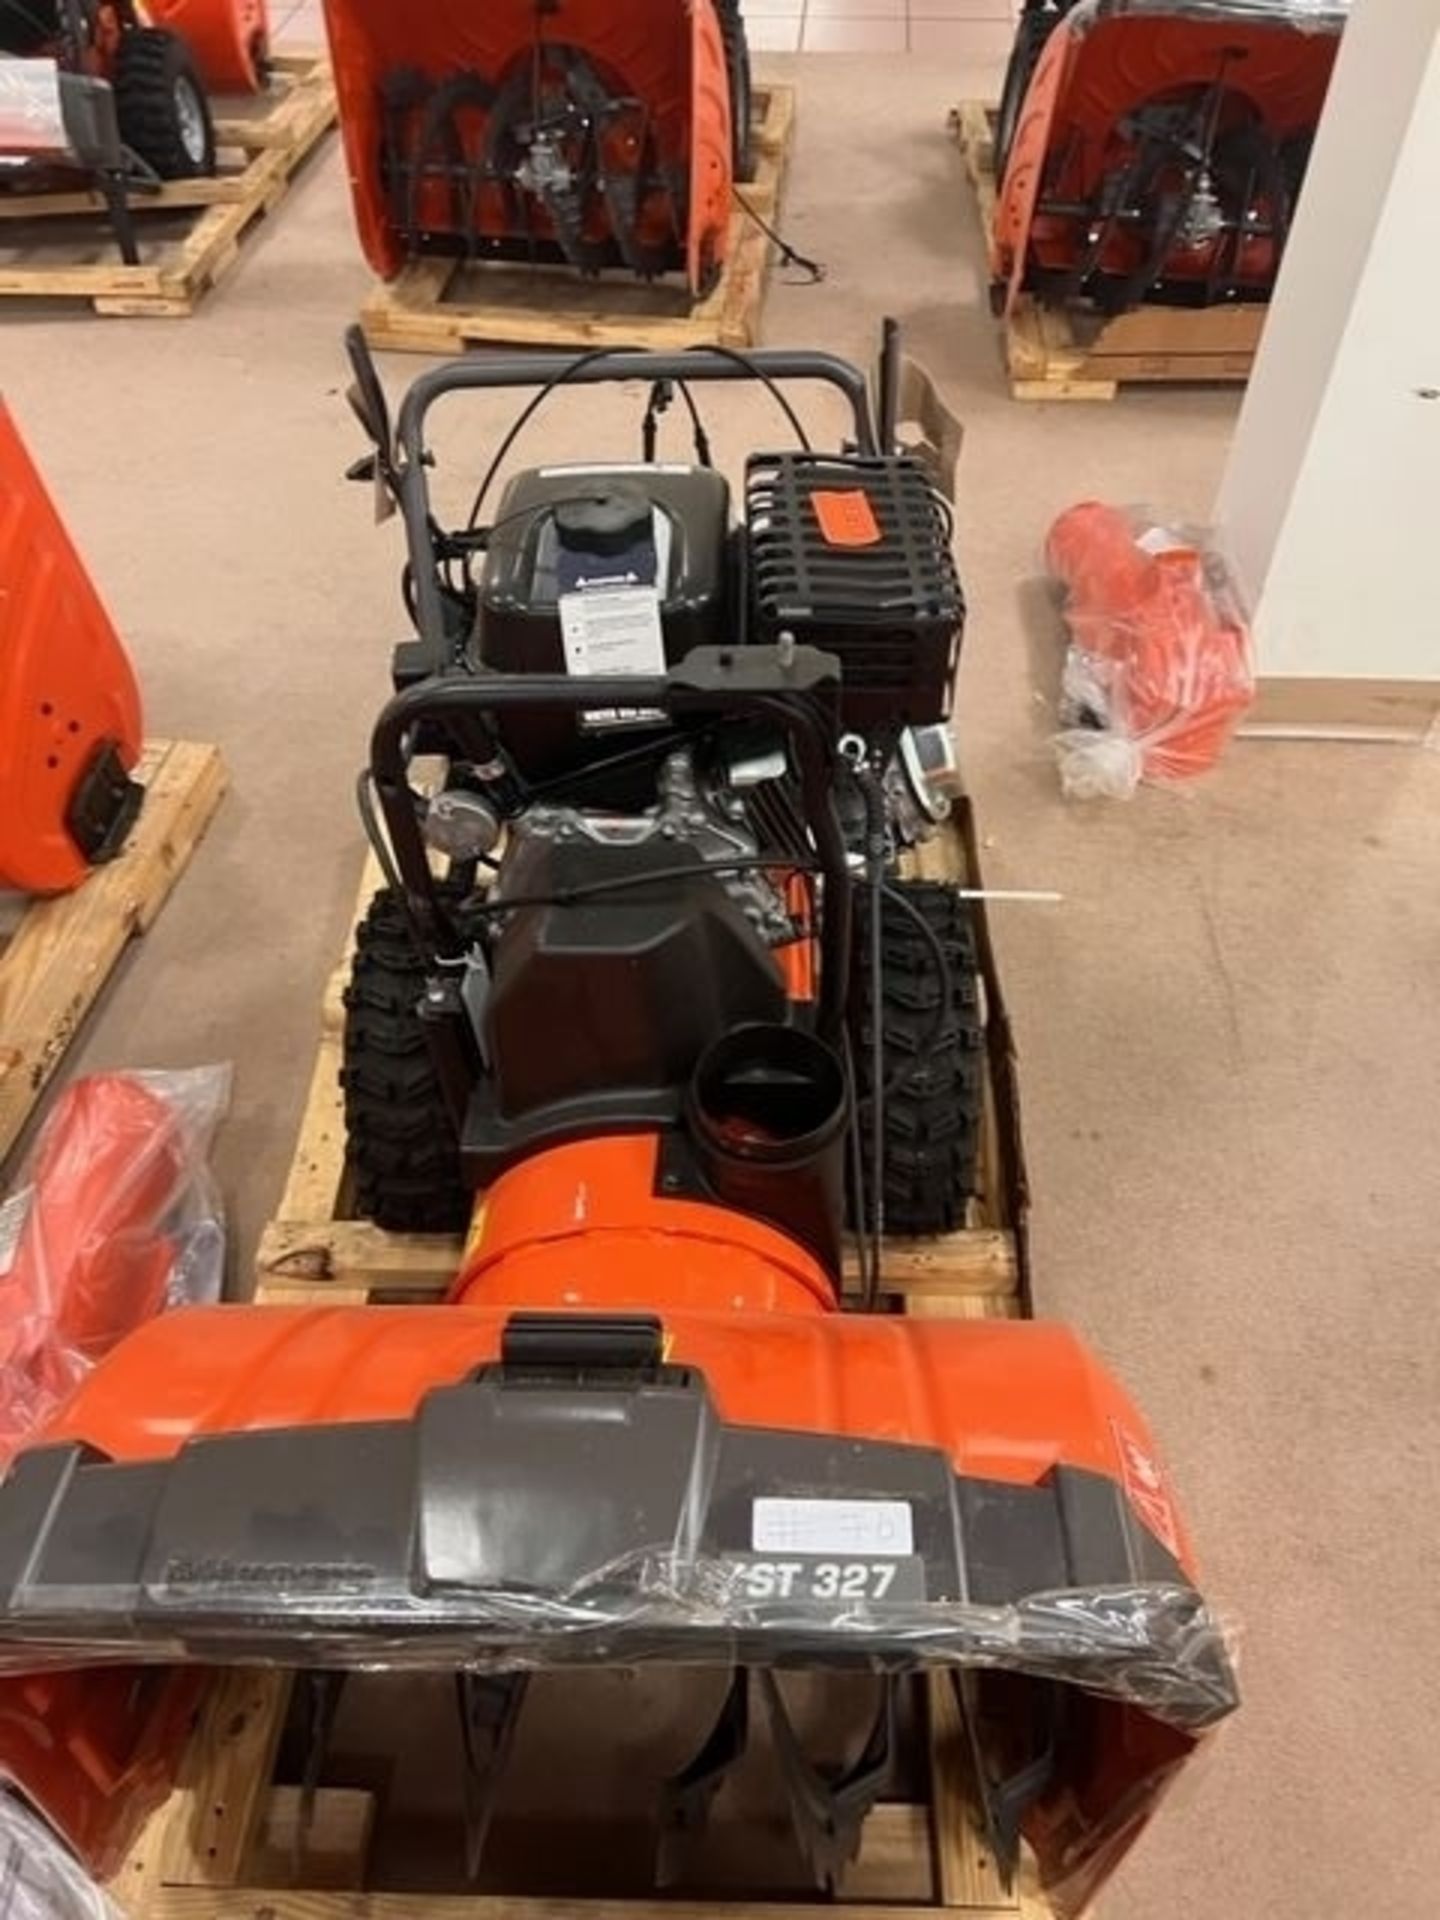 Husqvarna ST 327 Self Propelled Snow Blower - Approx. MSRP $1399 - Image 3 of 4